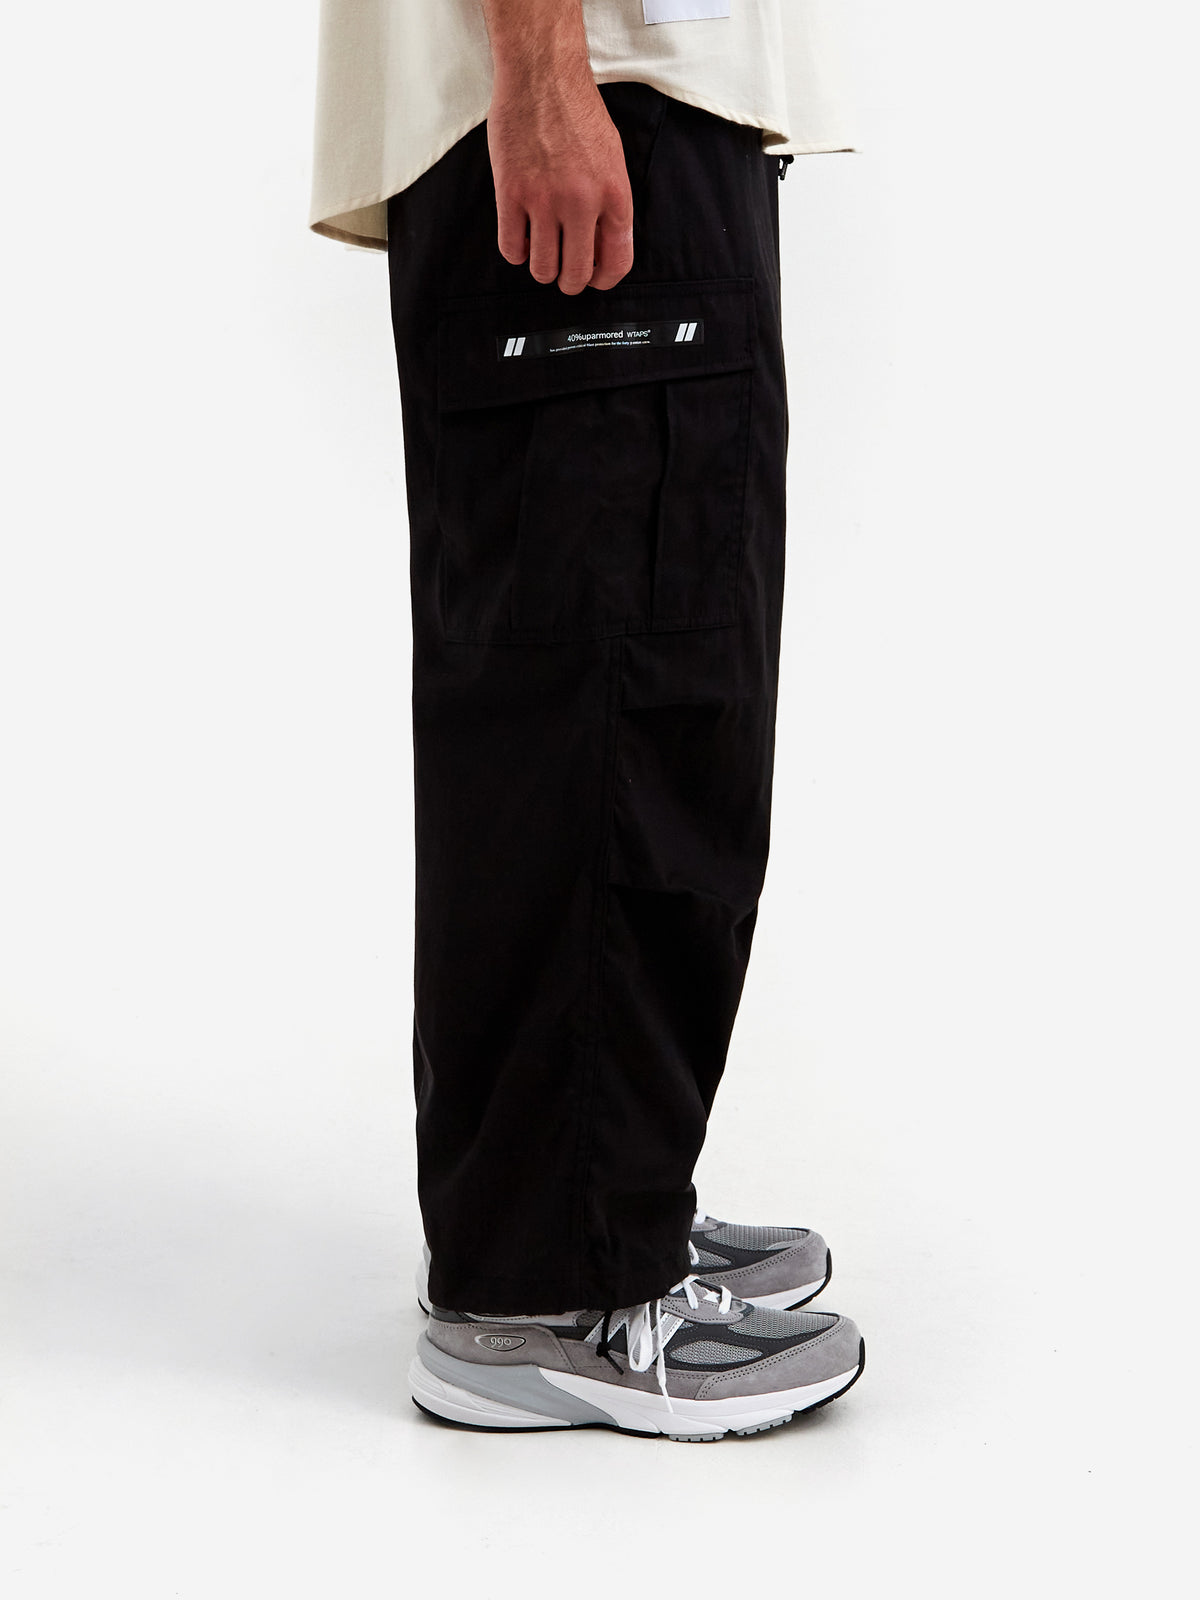 Shop Smarter, Live Better: WTAPS MILT0001 / Trousers 14 / NYCO